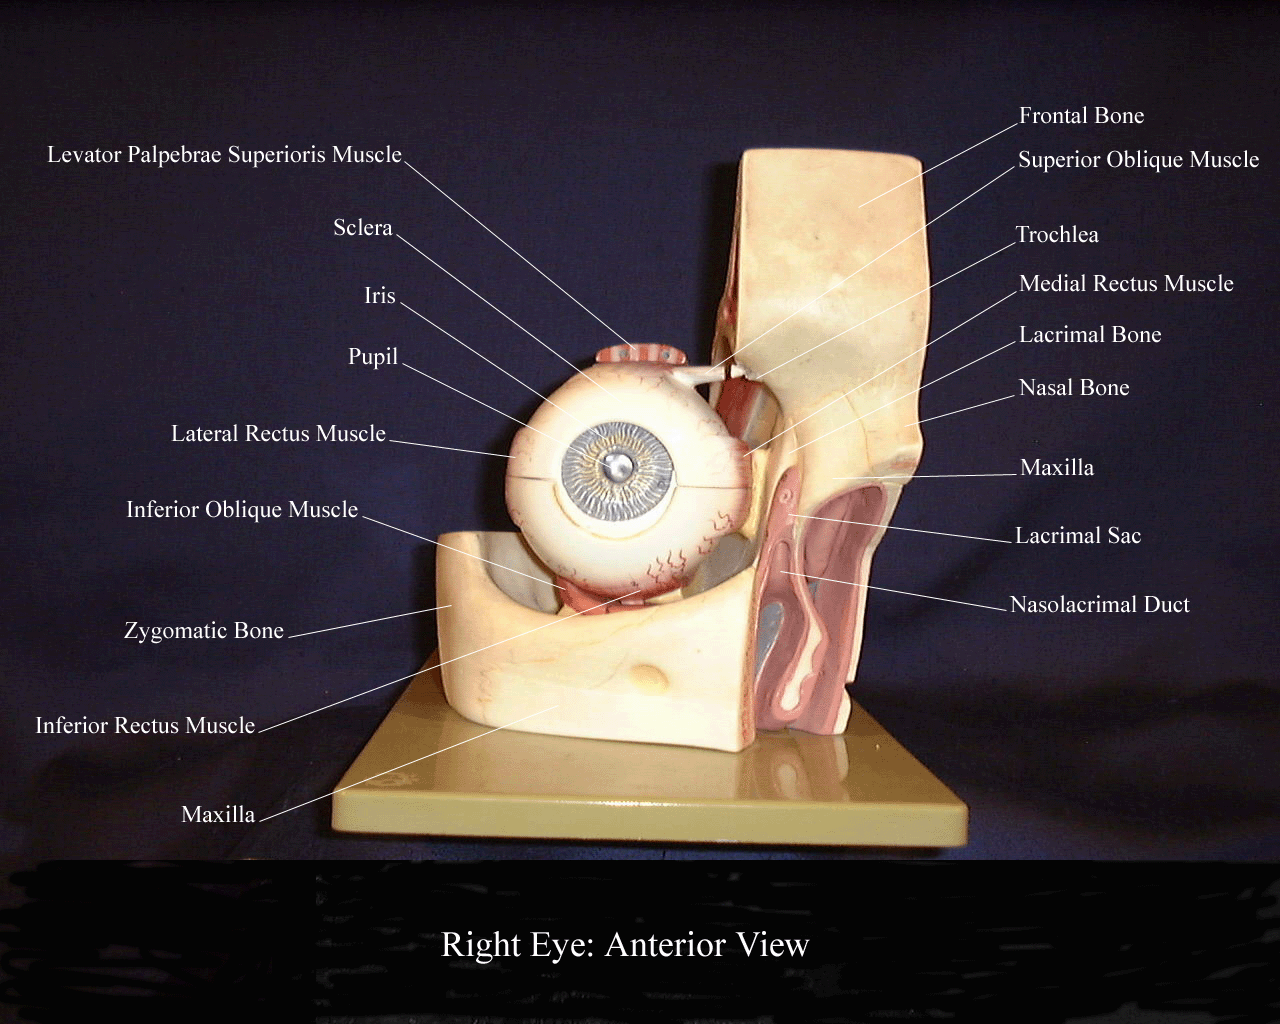 a picture of a model indicating an anterior view of the extrinsic eye muscles including the palpebral structures